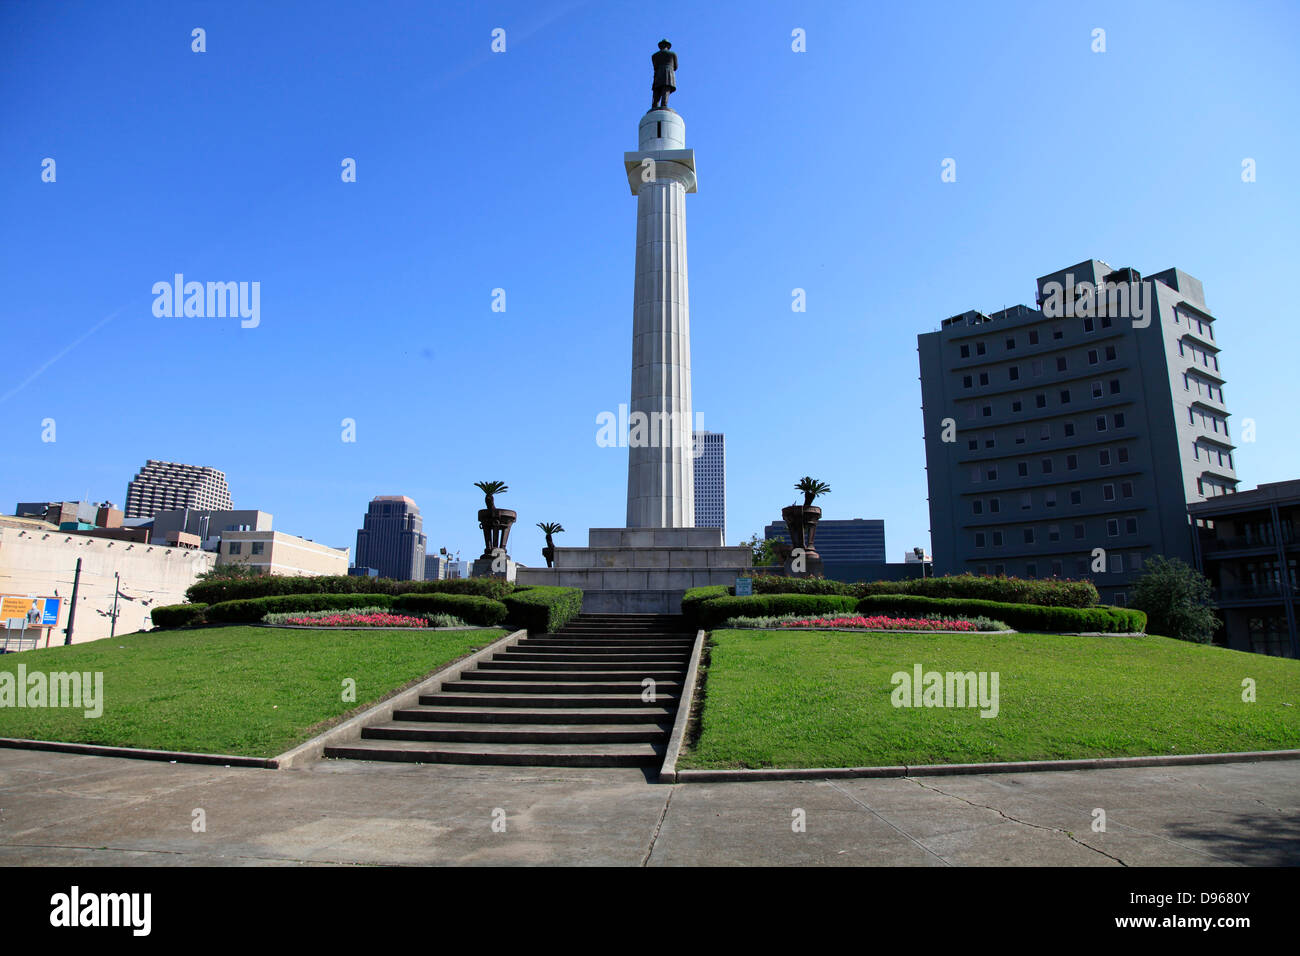 Statue of Robert E. Lee in the center of the Lee Circle in New Orleans. Robert Edward Lee was born at January 19, 1807 in Virginia and died October 12, 1870 in Lexington, Virginia.  Photo: Klaus Nowottnick Date: April 26, 2013 Stock Photo